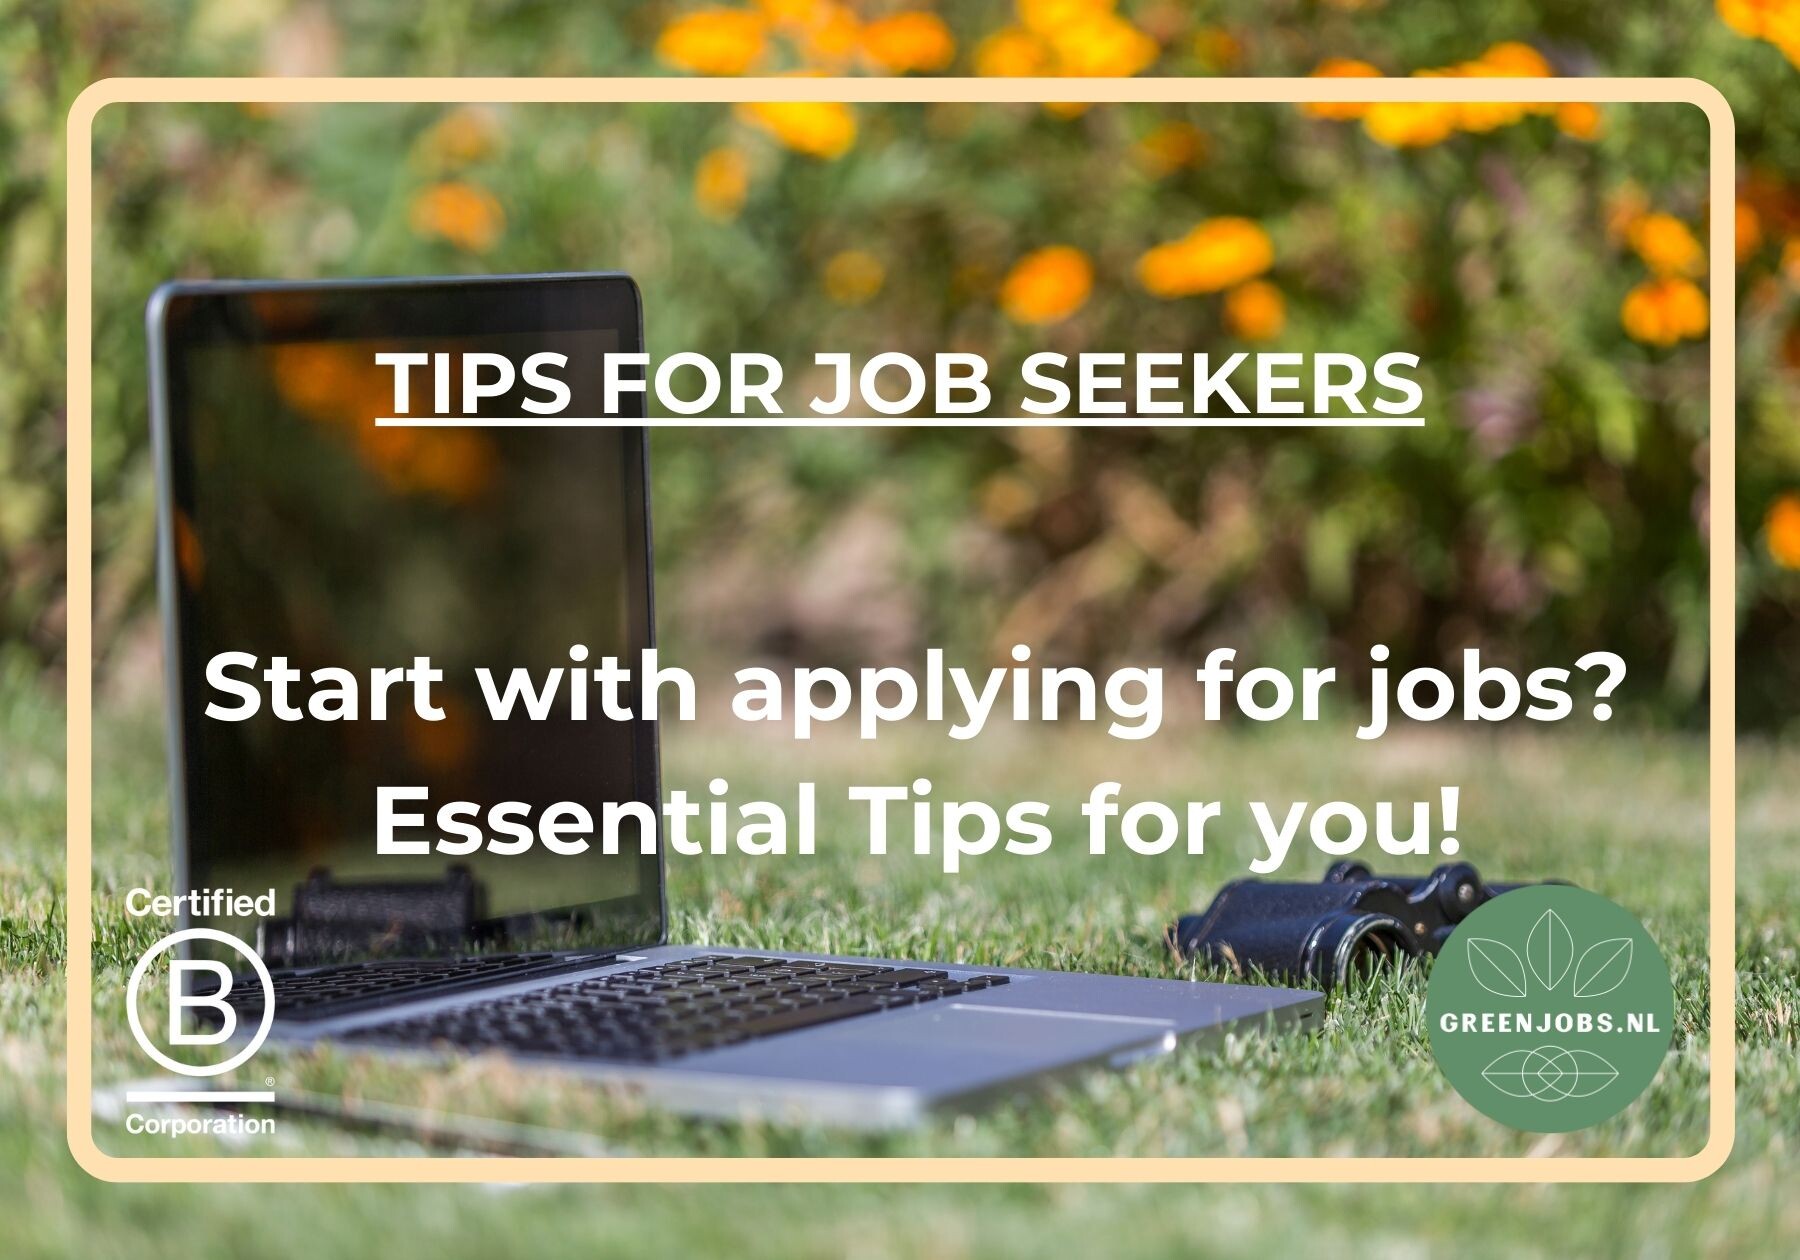 Applying for jobs: Essential job application tips for success